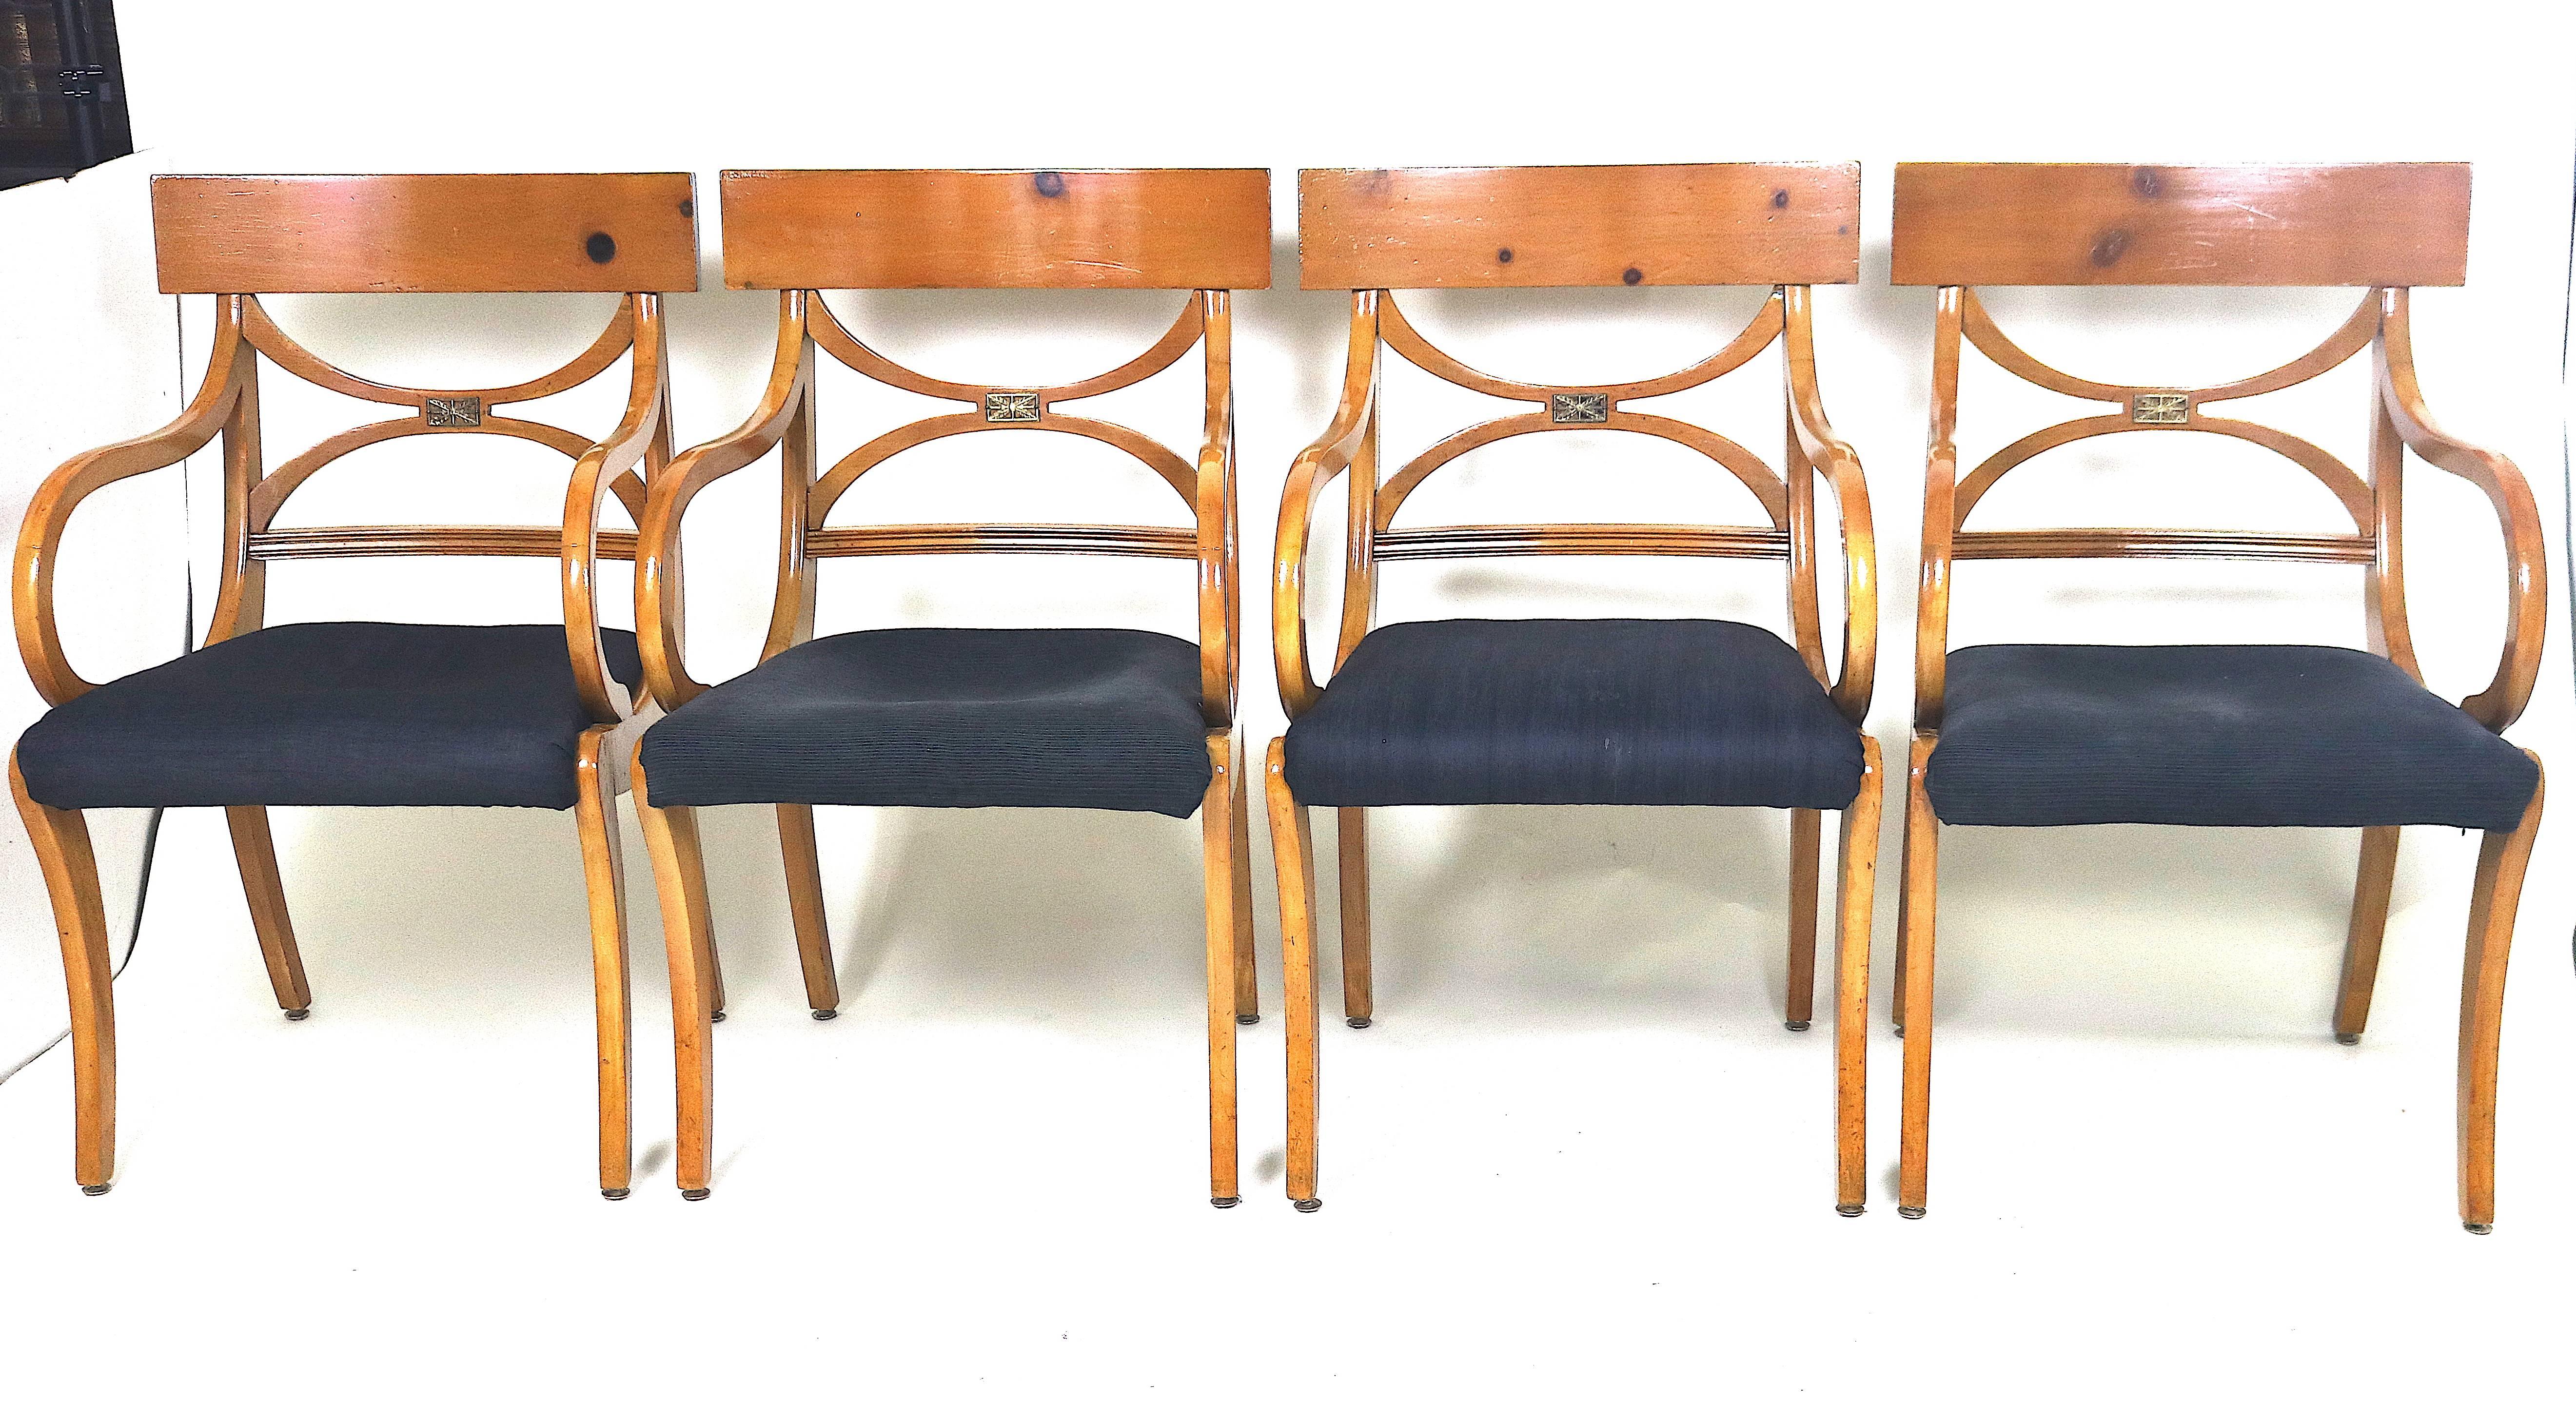 20th Century Tycoon's Fruitwood Klismos Dining Chairs- set of 10- Elegant Ruhlmann Style For Sale